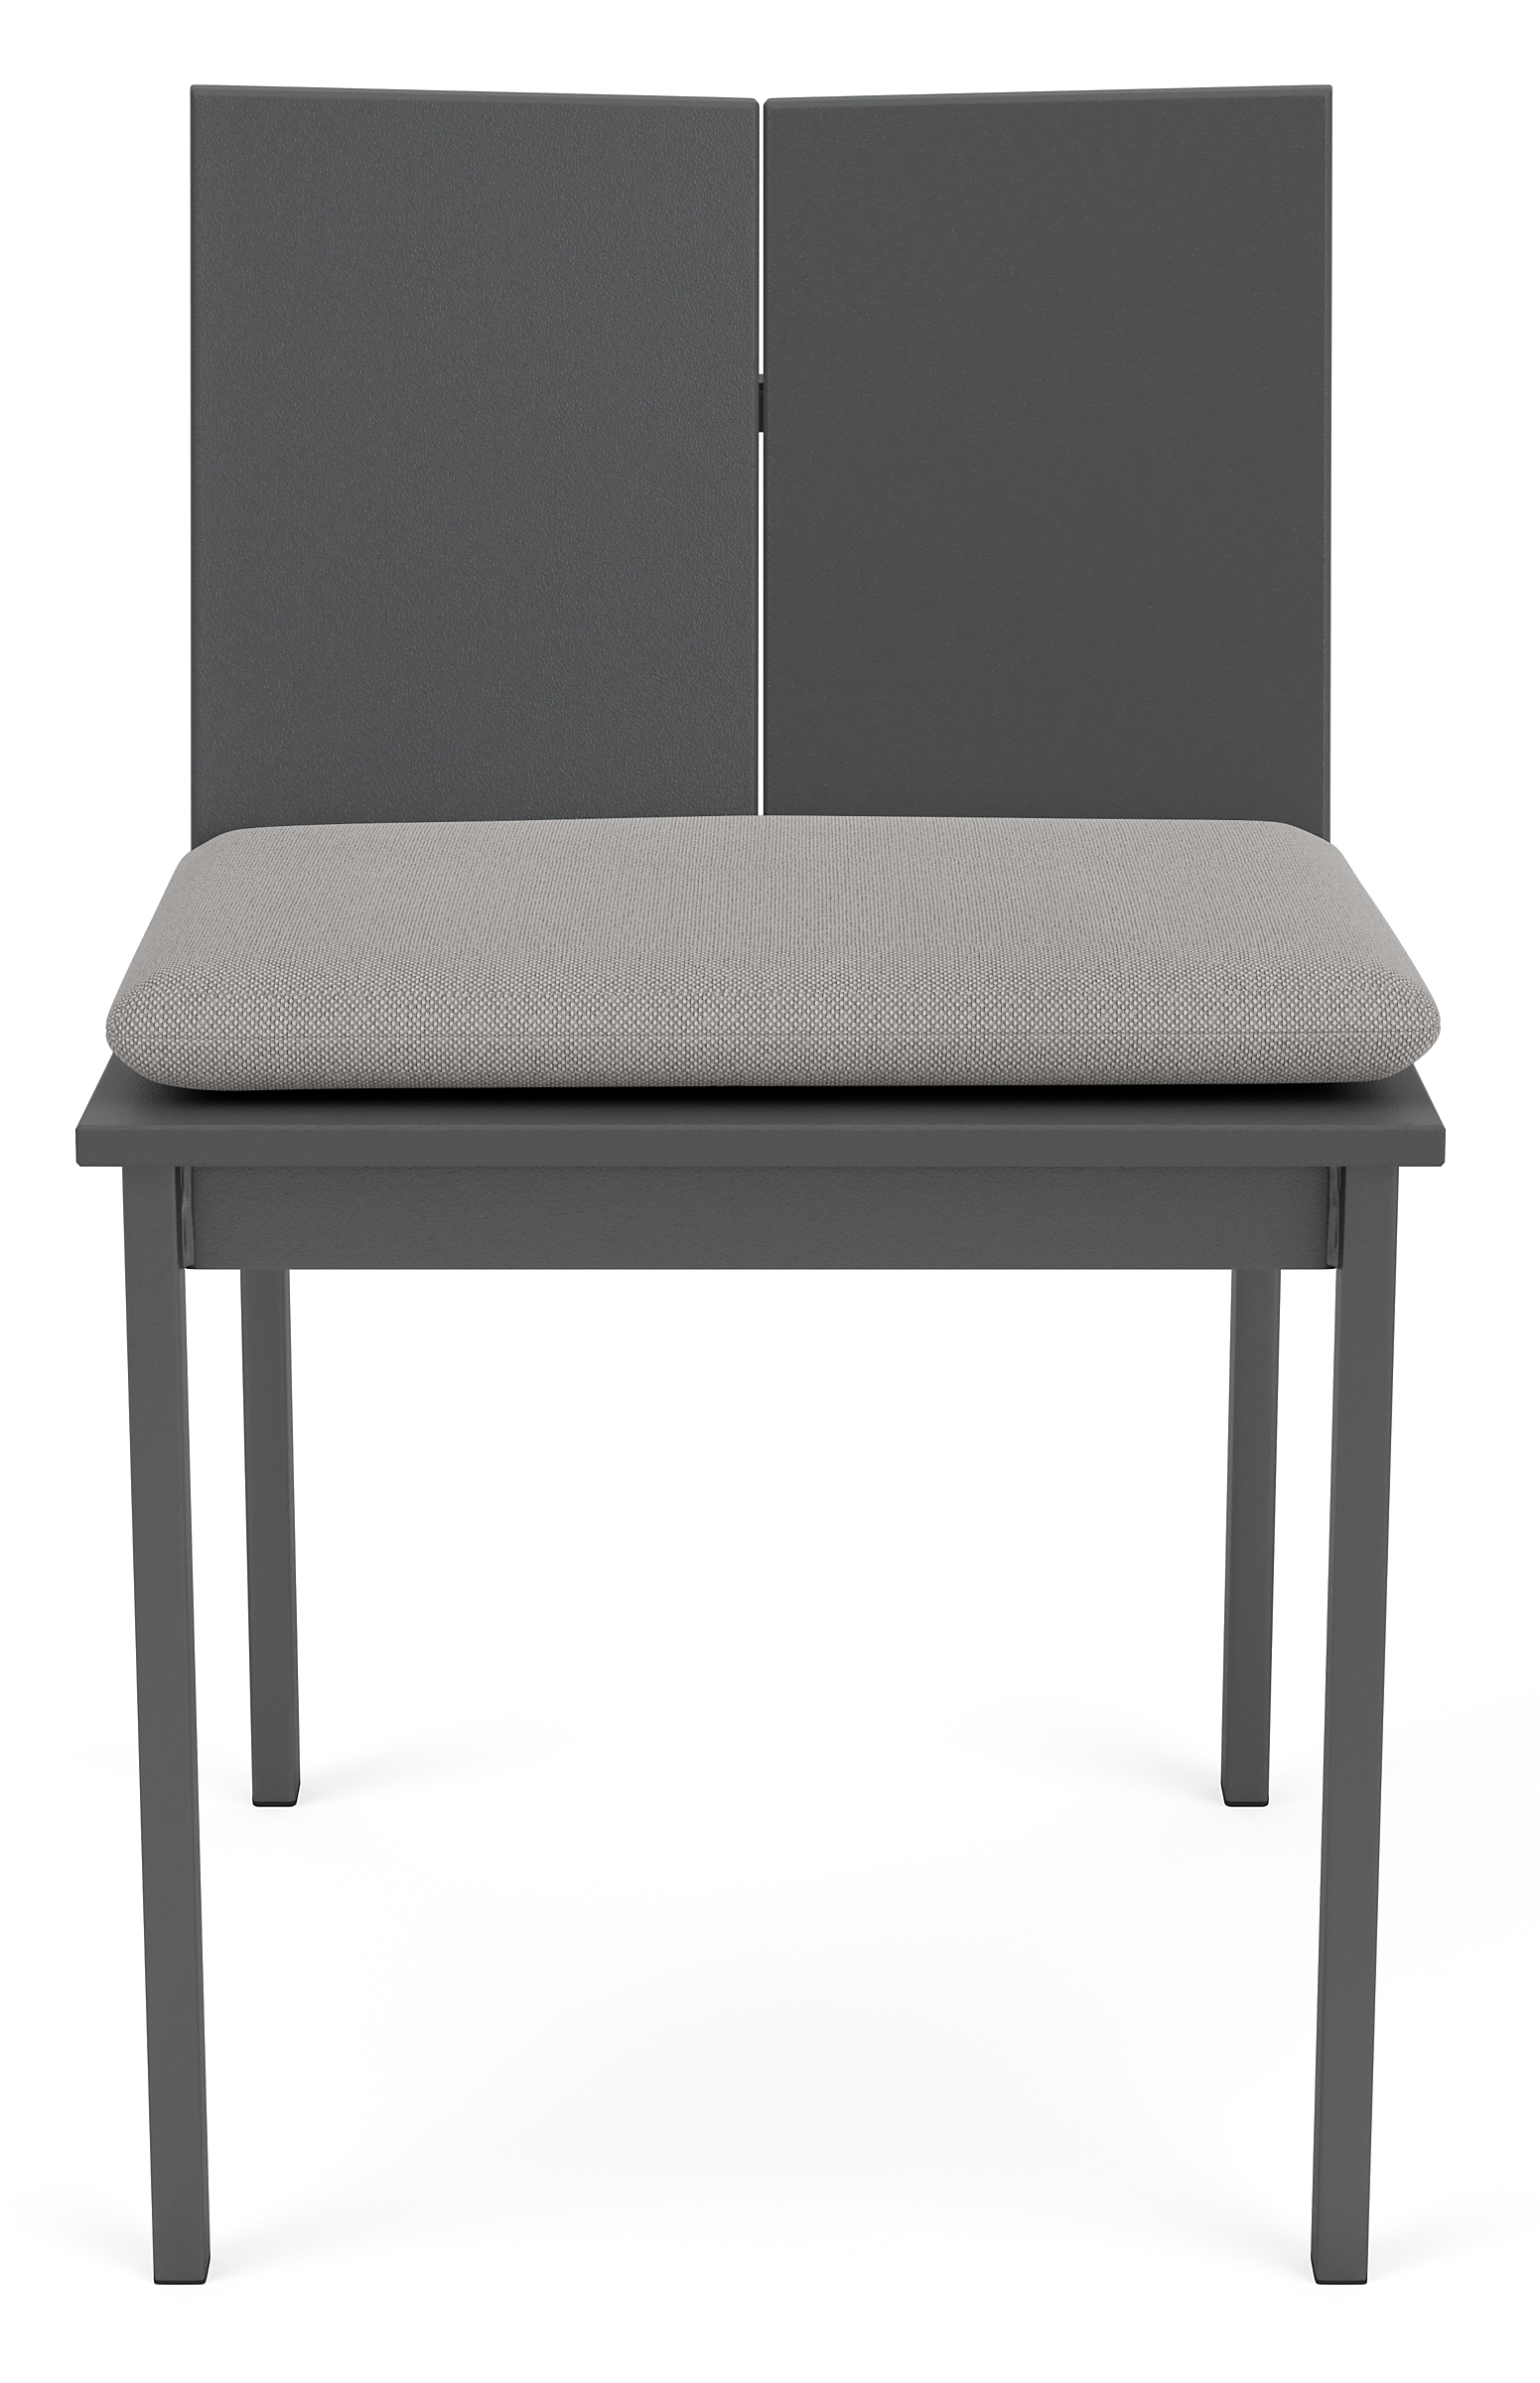 Front view of Mattix Side Chair in Grey HDPE with Pelham Grey Cushion.